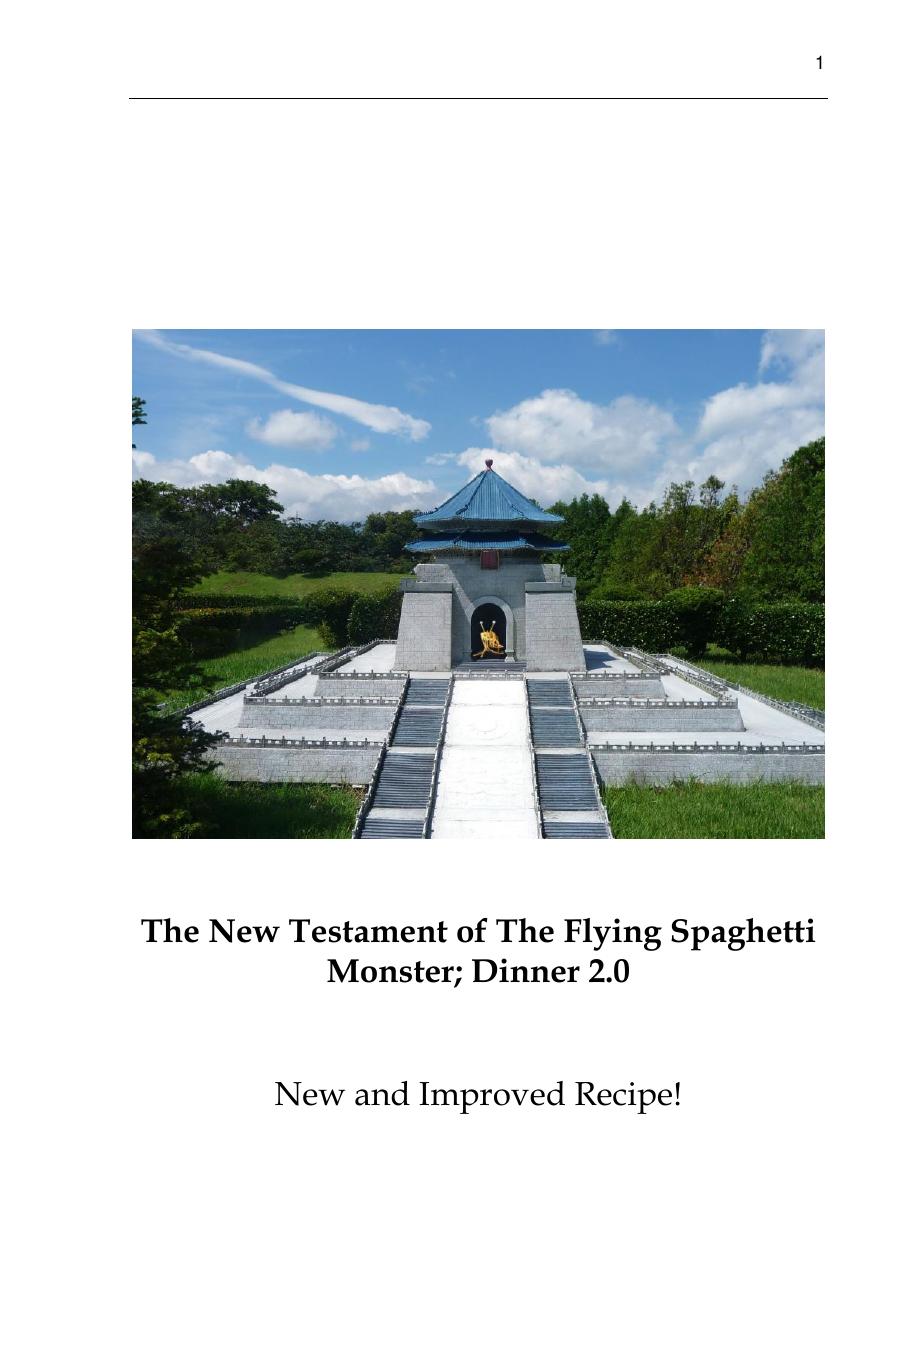 The New Testament of The Flying Spaghetti Monster; Dinner 2.0: The New and Improved Recipe! by Violet Johnson